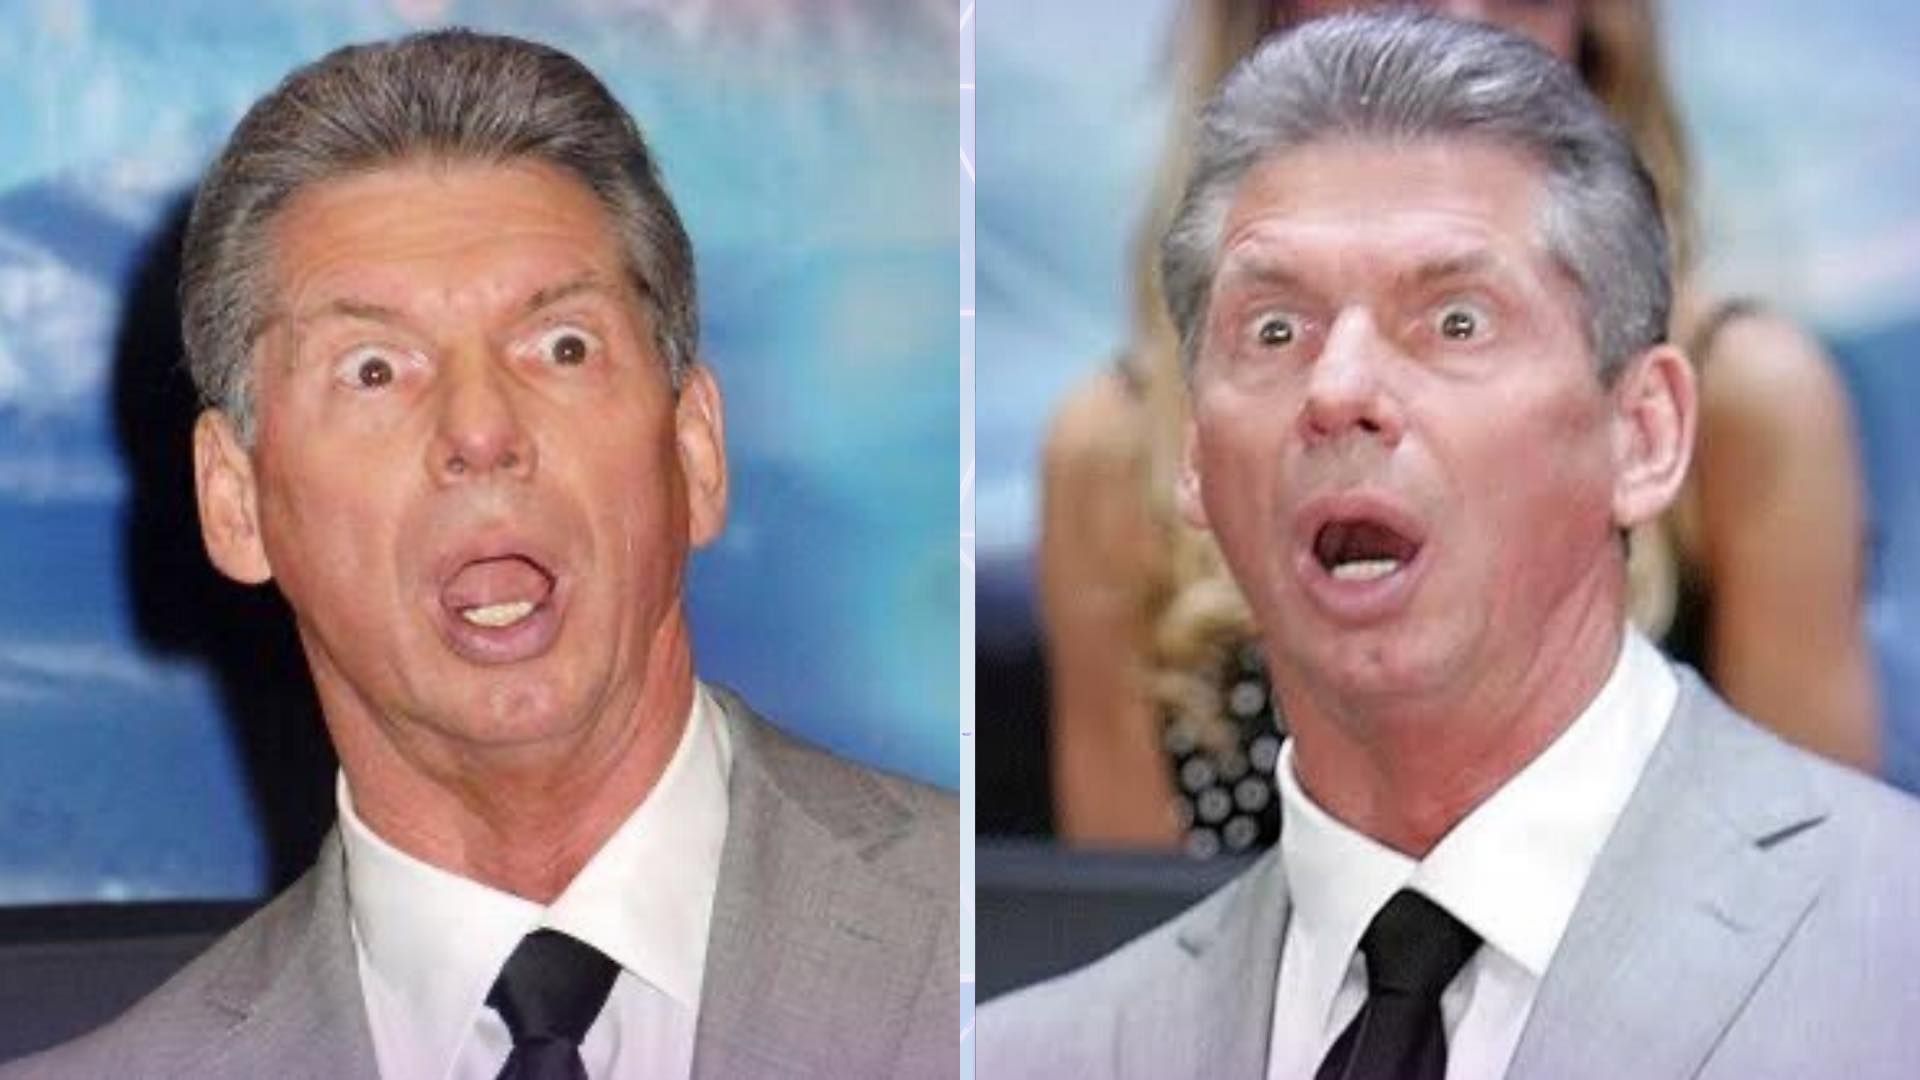 Vince McMahon is an Executive Chairman in WWE.